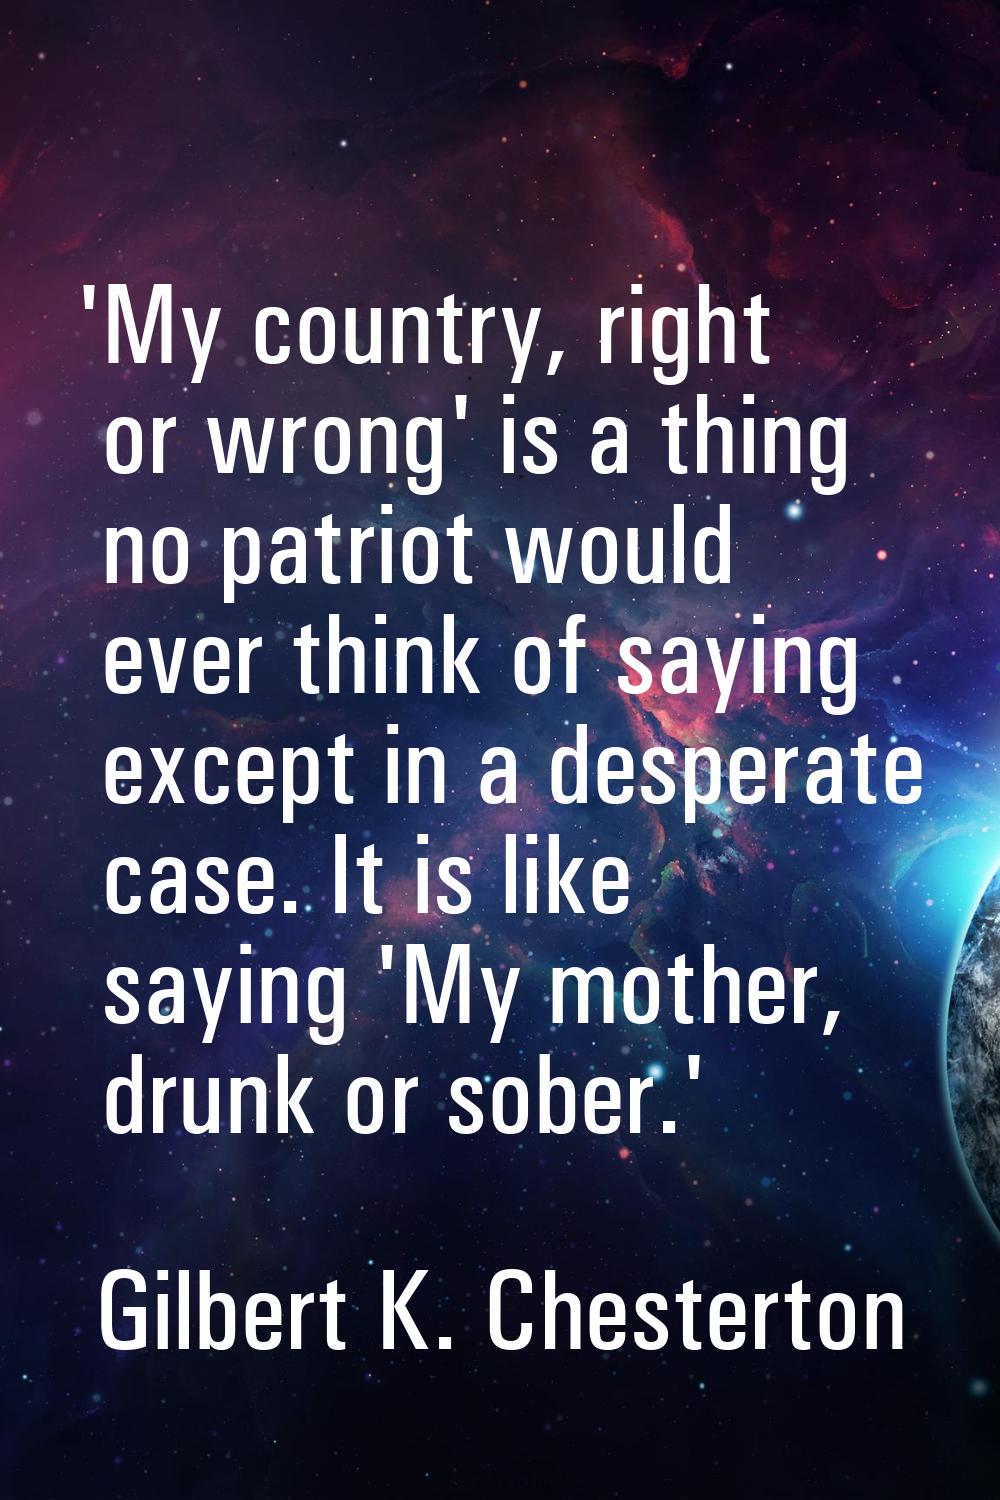 'My country, right or wrong' is a thing no patriot would ever think of saying except in a desperate